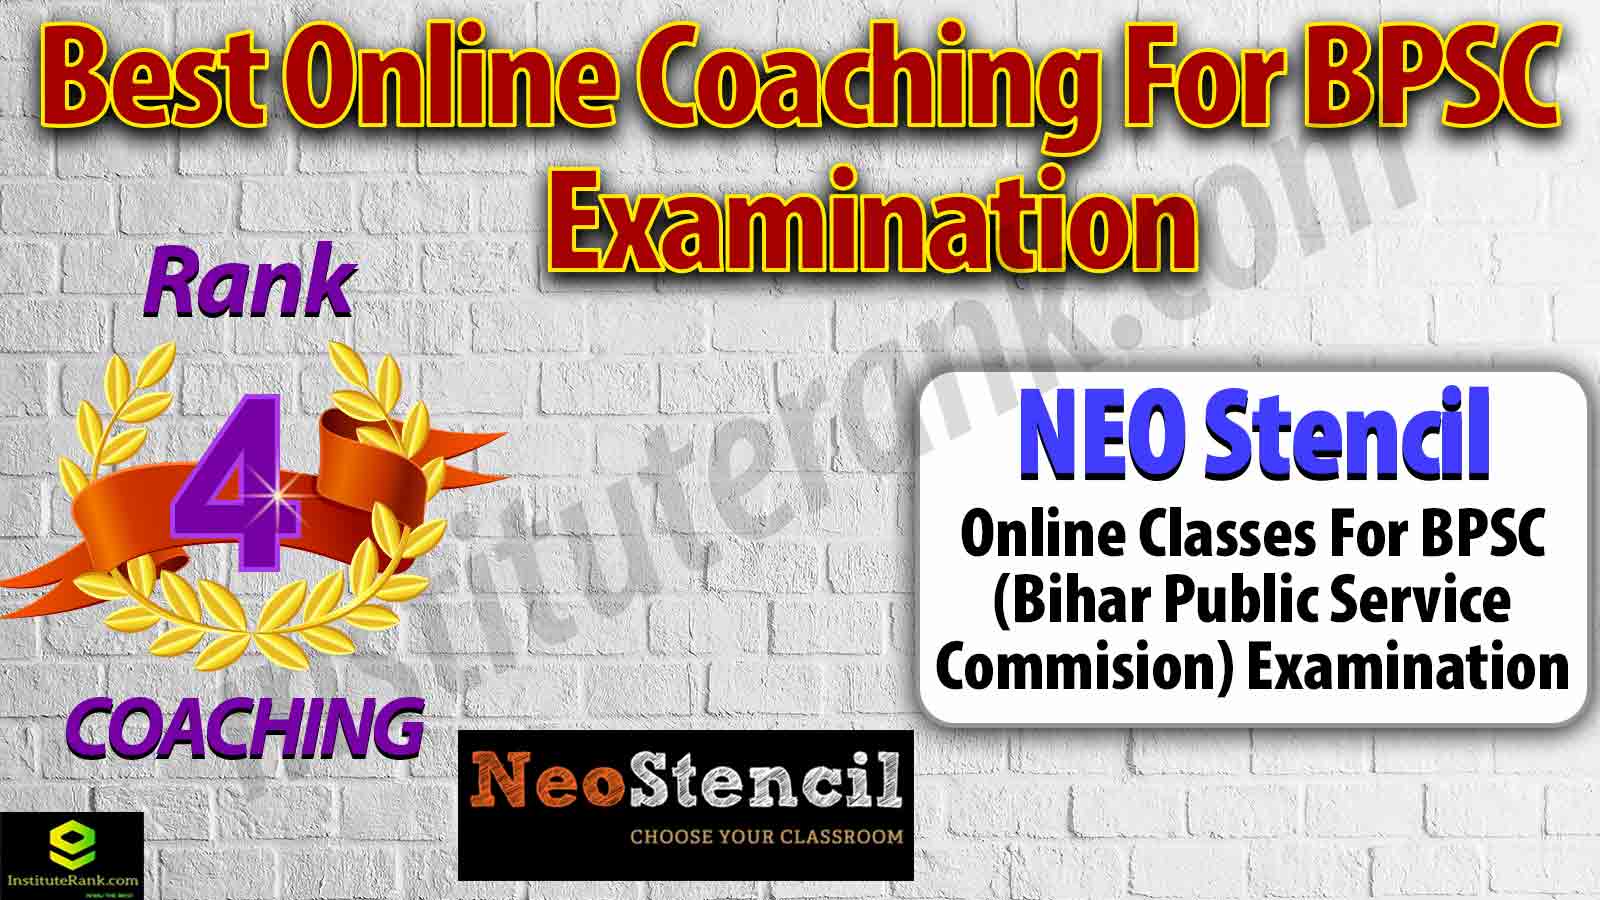 Best Online Coaching Centre for BPSC Examination